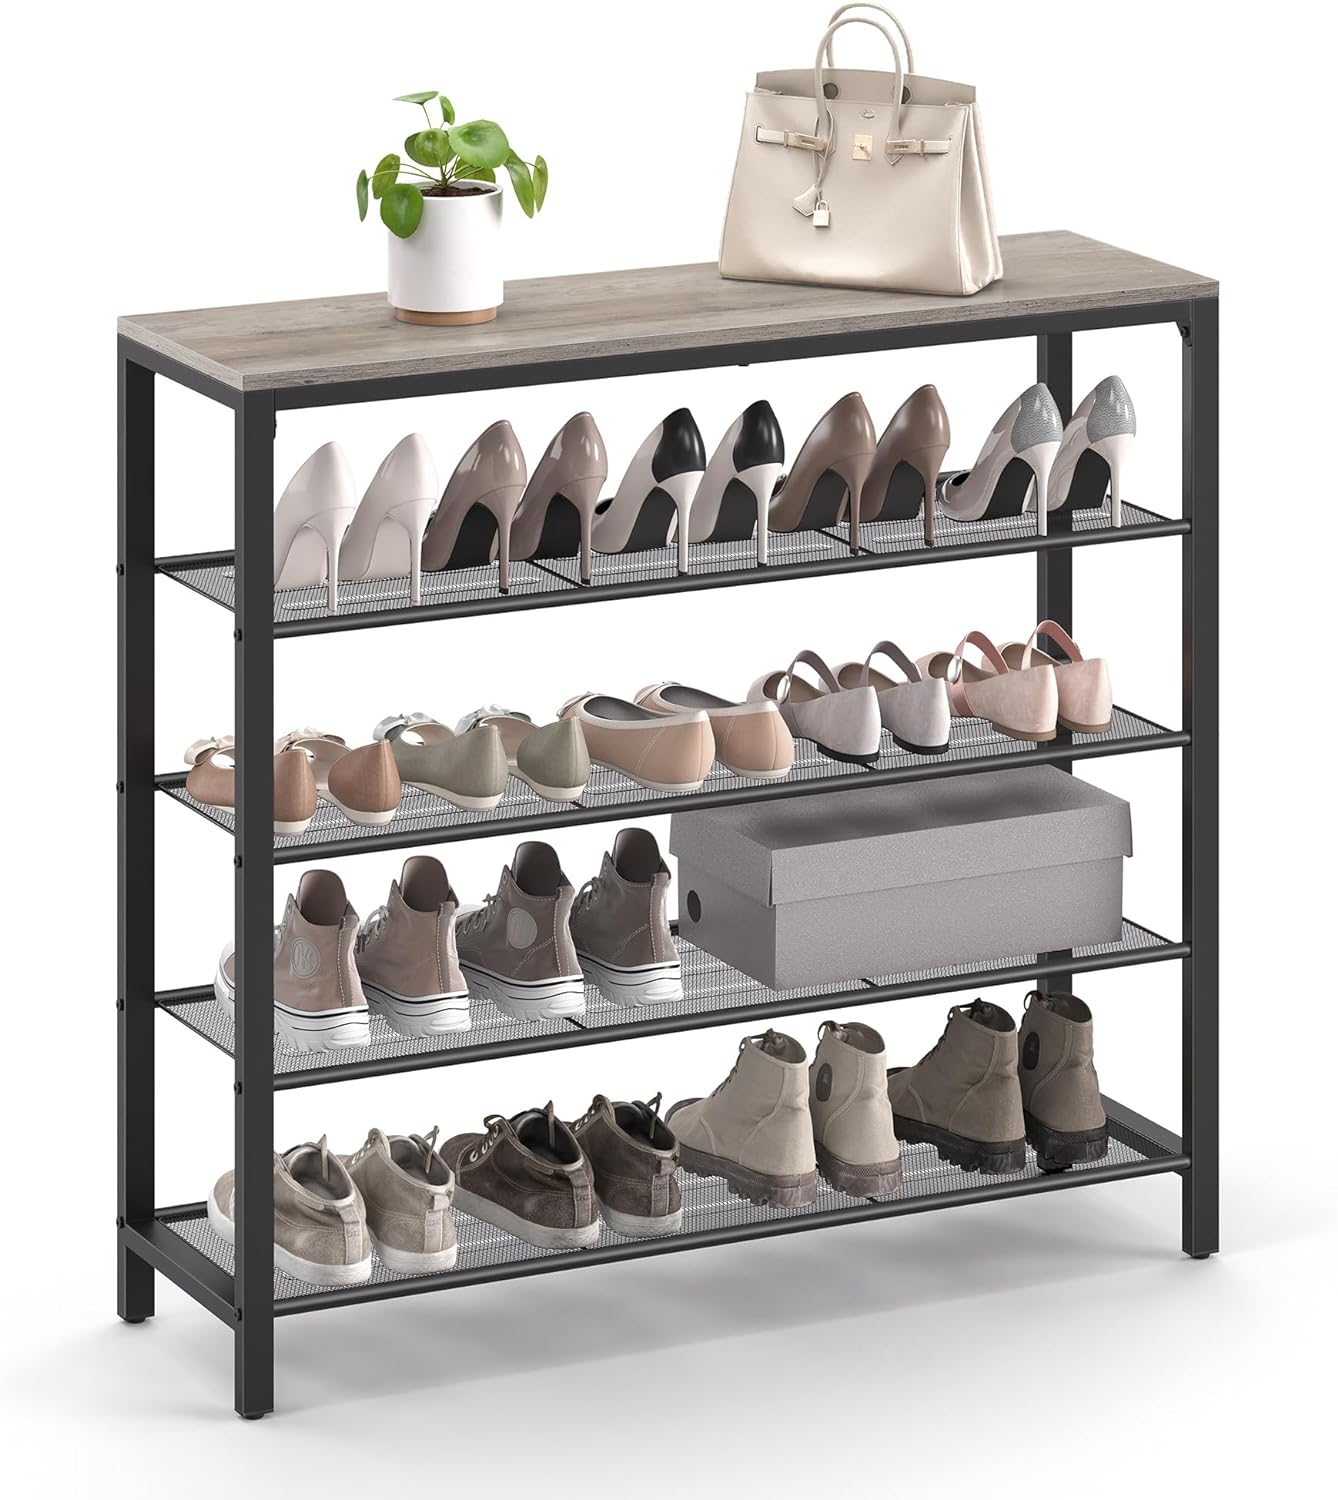 https://bigbigmart.com/wp-content/uploads/2023/12/VASAGLE-INDESTIC-Shoe-Rack-Organizer-for-Closet-with-4-Mesh-Shelves-and-Large-Top-for-Bags-Entryway-Hallway-Shelf-Steel-Frame-Industrial-Greige-and-Black-ULBS015B02-11.8-x-39.4-x-36.4-Inches.jpg